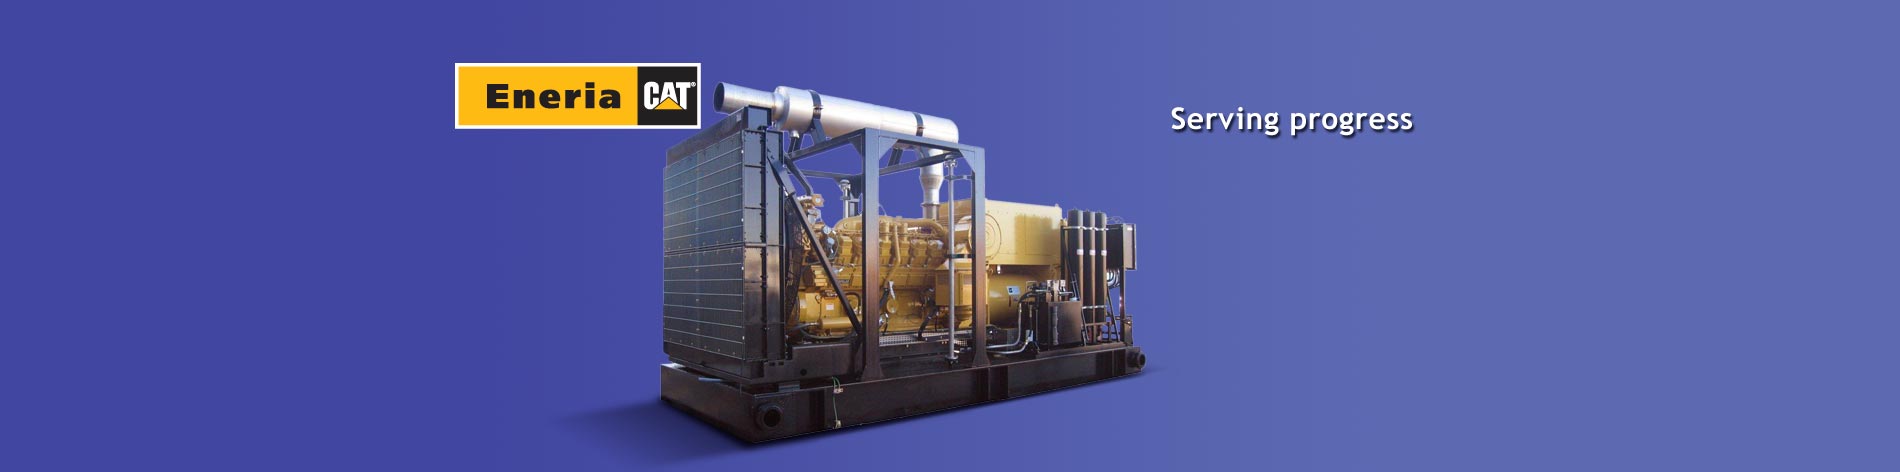 Our Caterpillar engines are suited to the oil and oil-services industries.